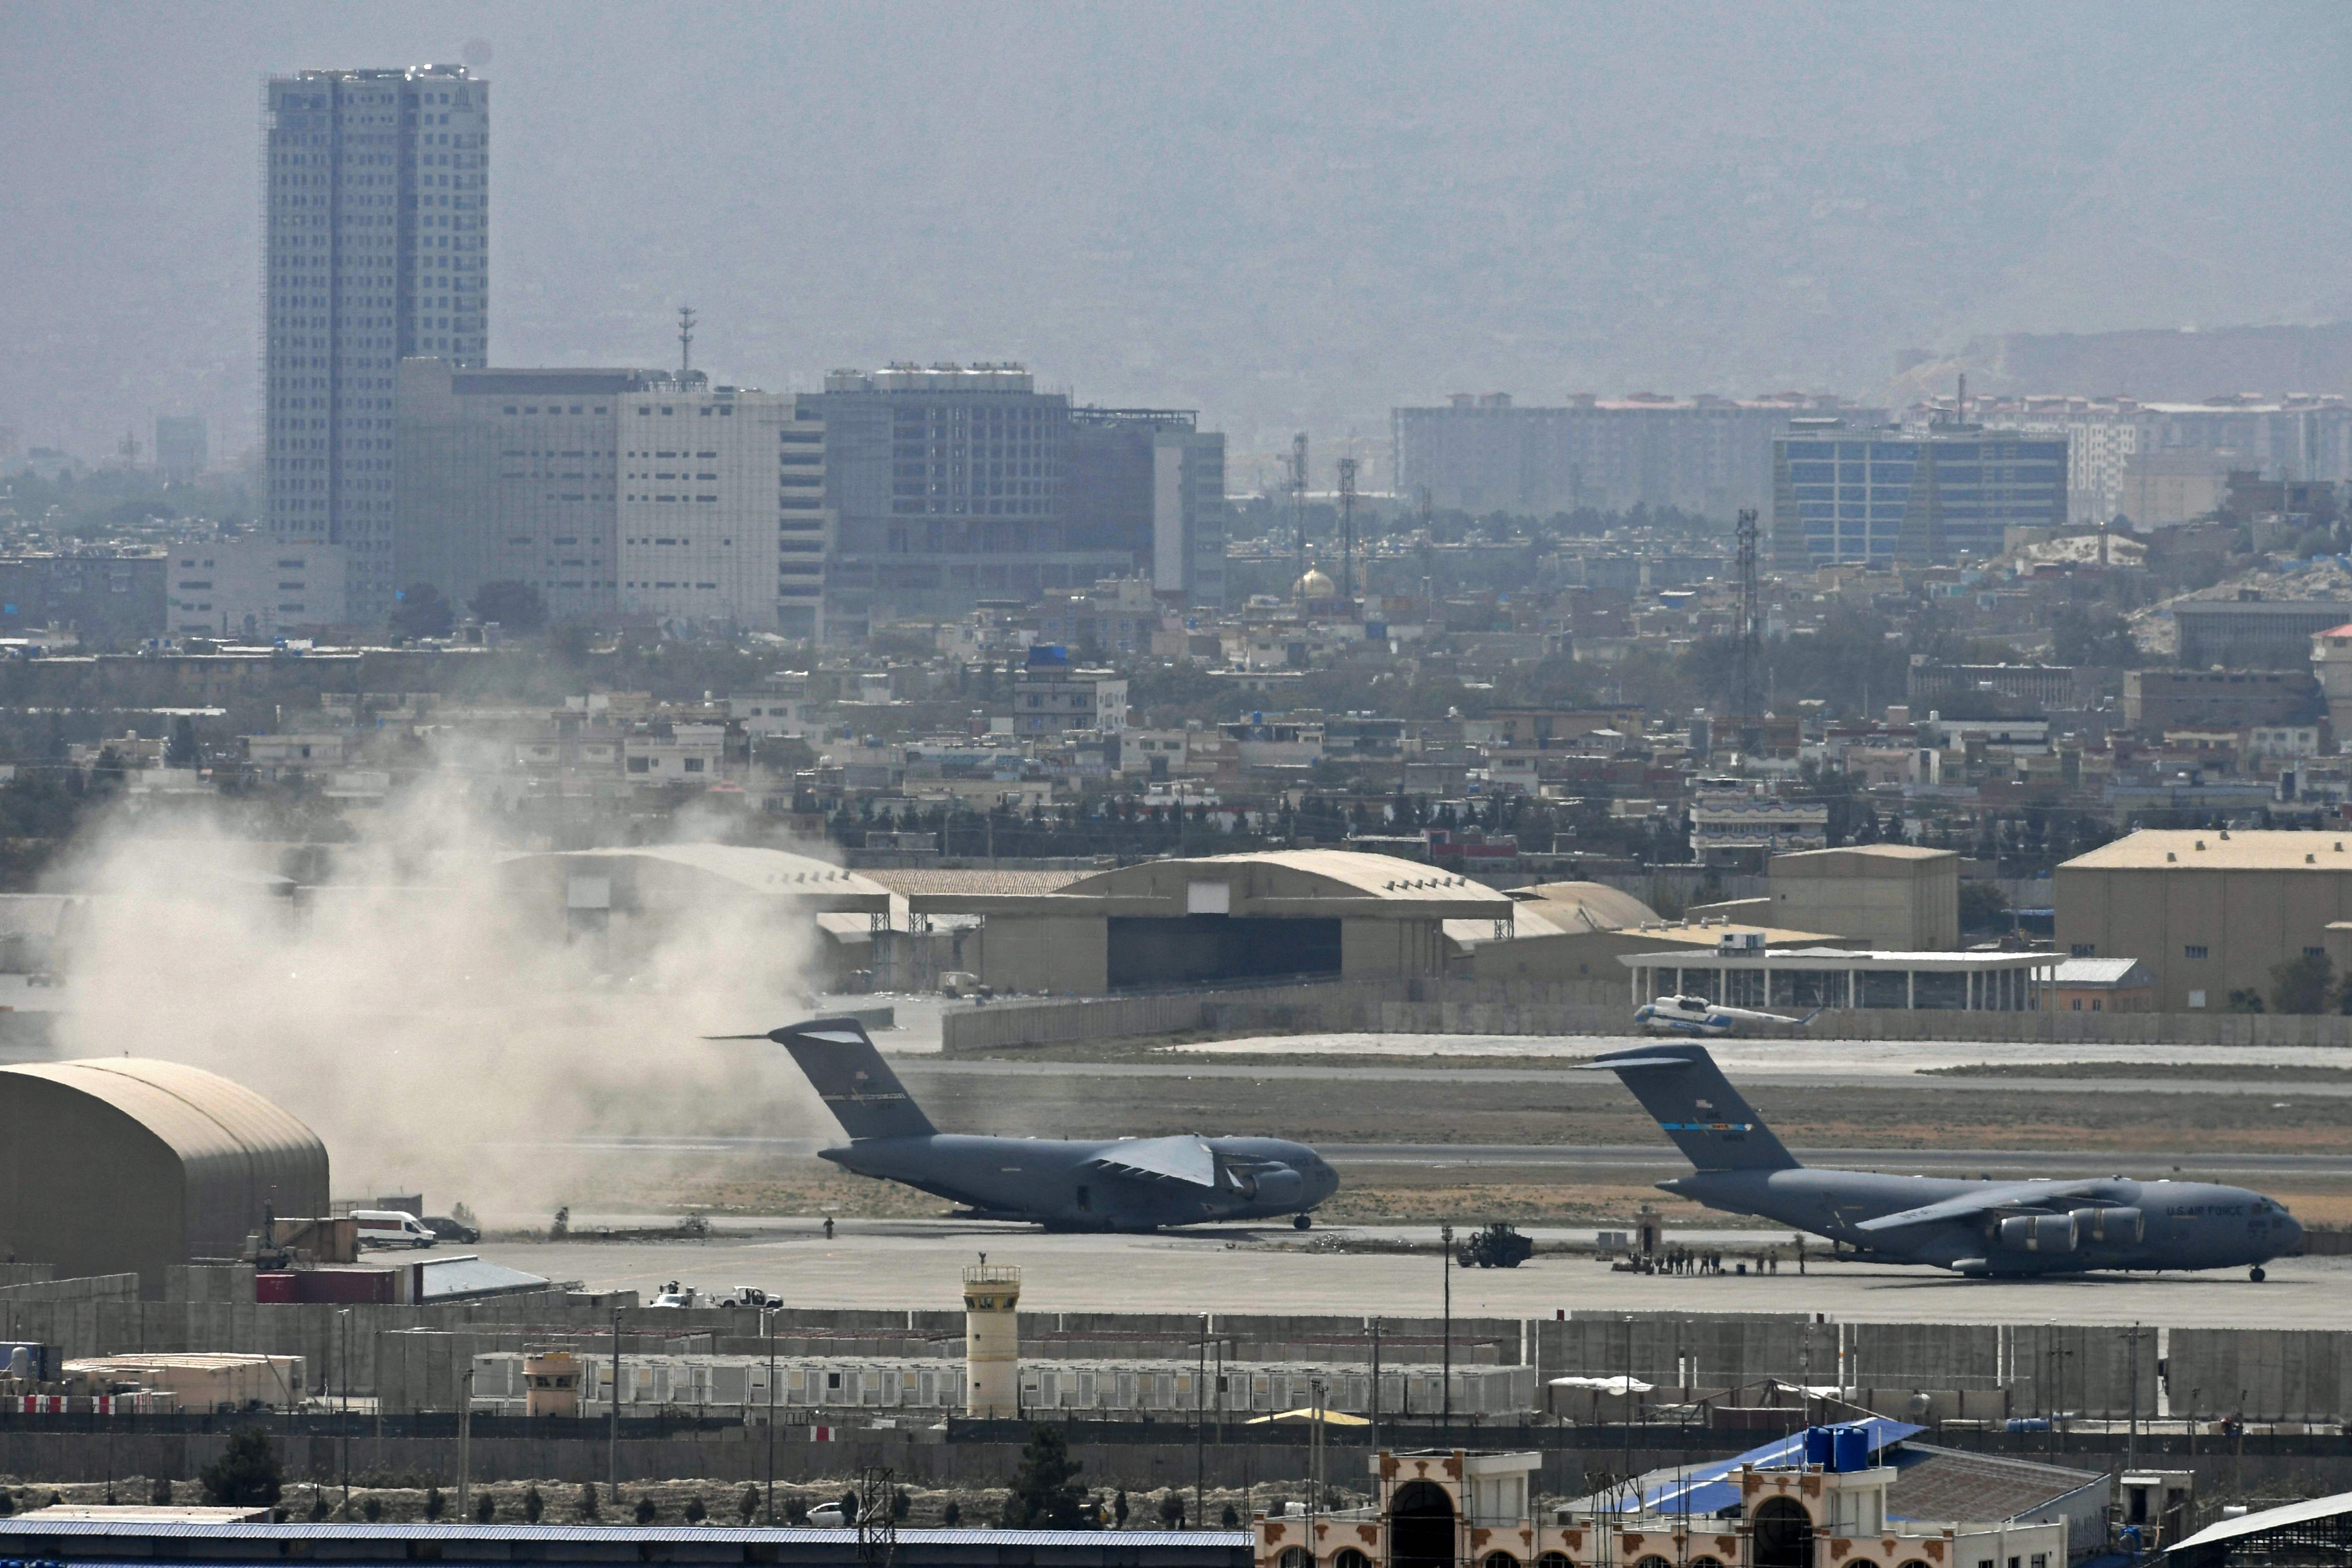 A US air force plane prepares for take-off from Kabul airport on Monday